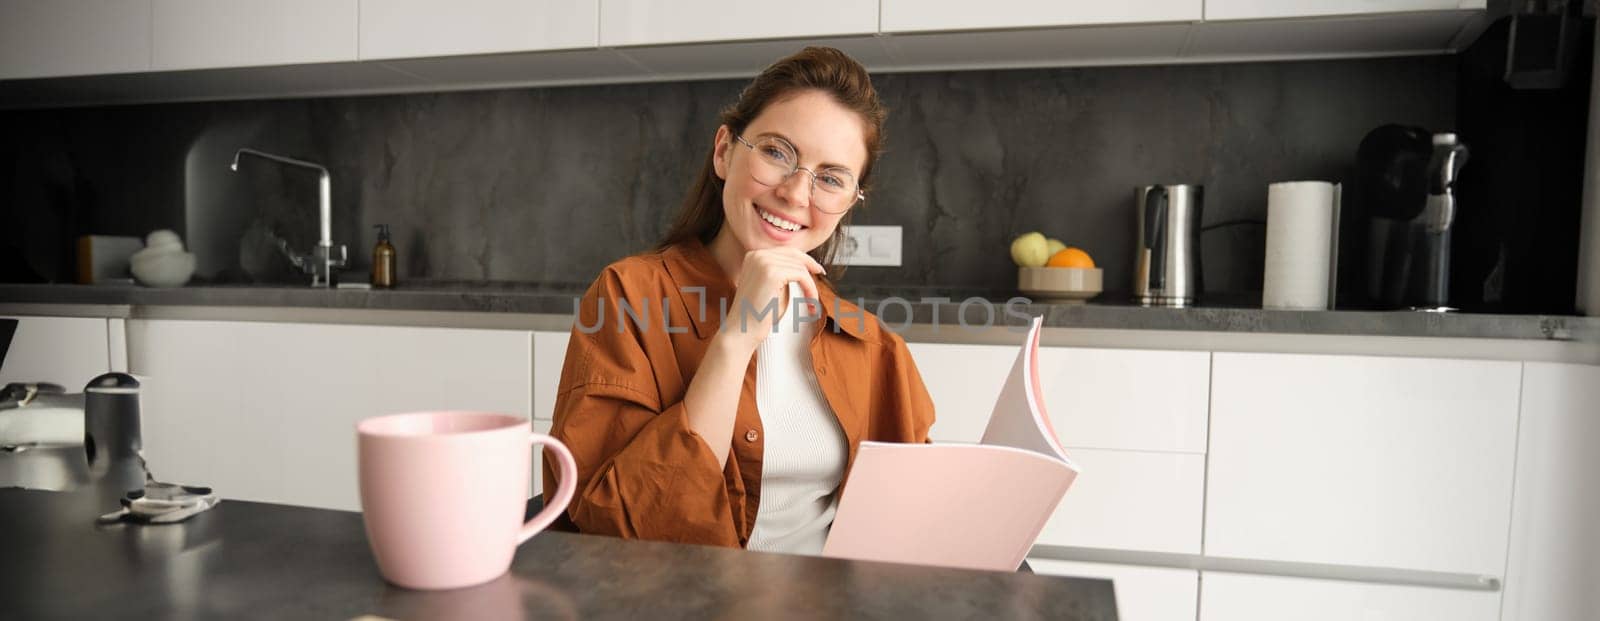 Portrait of beautiful young woman working from home, freelance tutor preparing for lesson. Student sitting in kitchen with folder, reading documents.